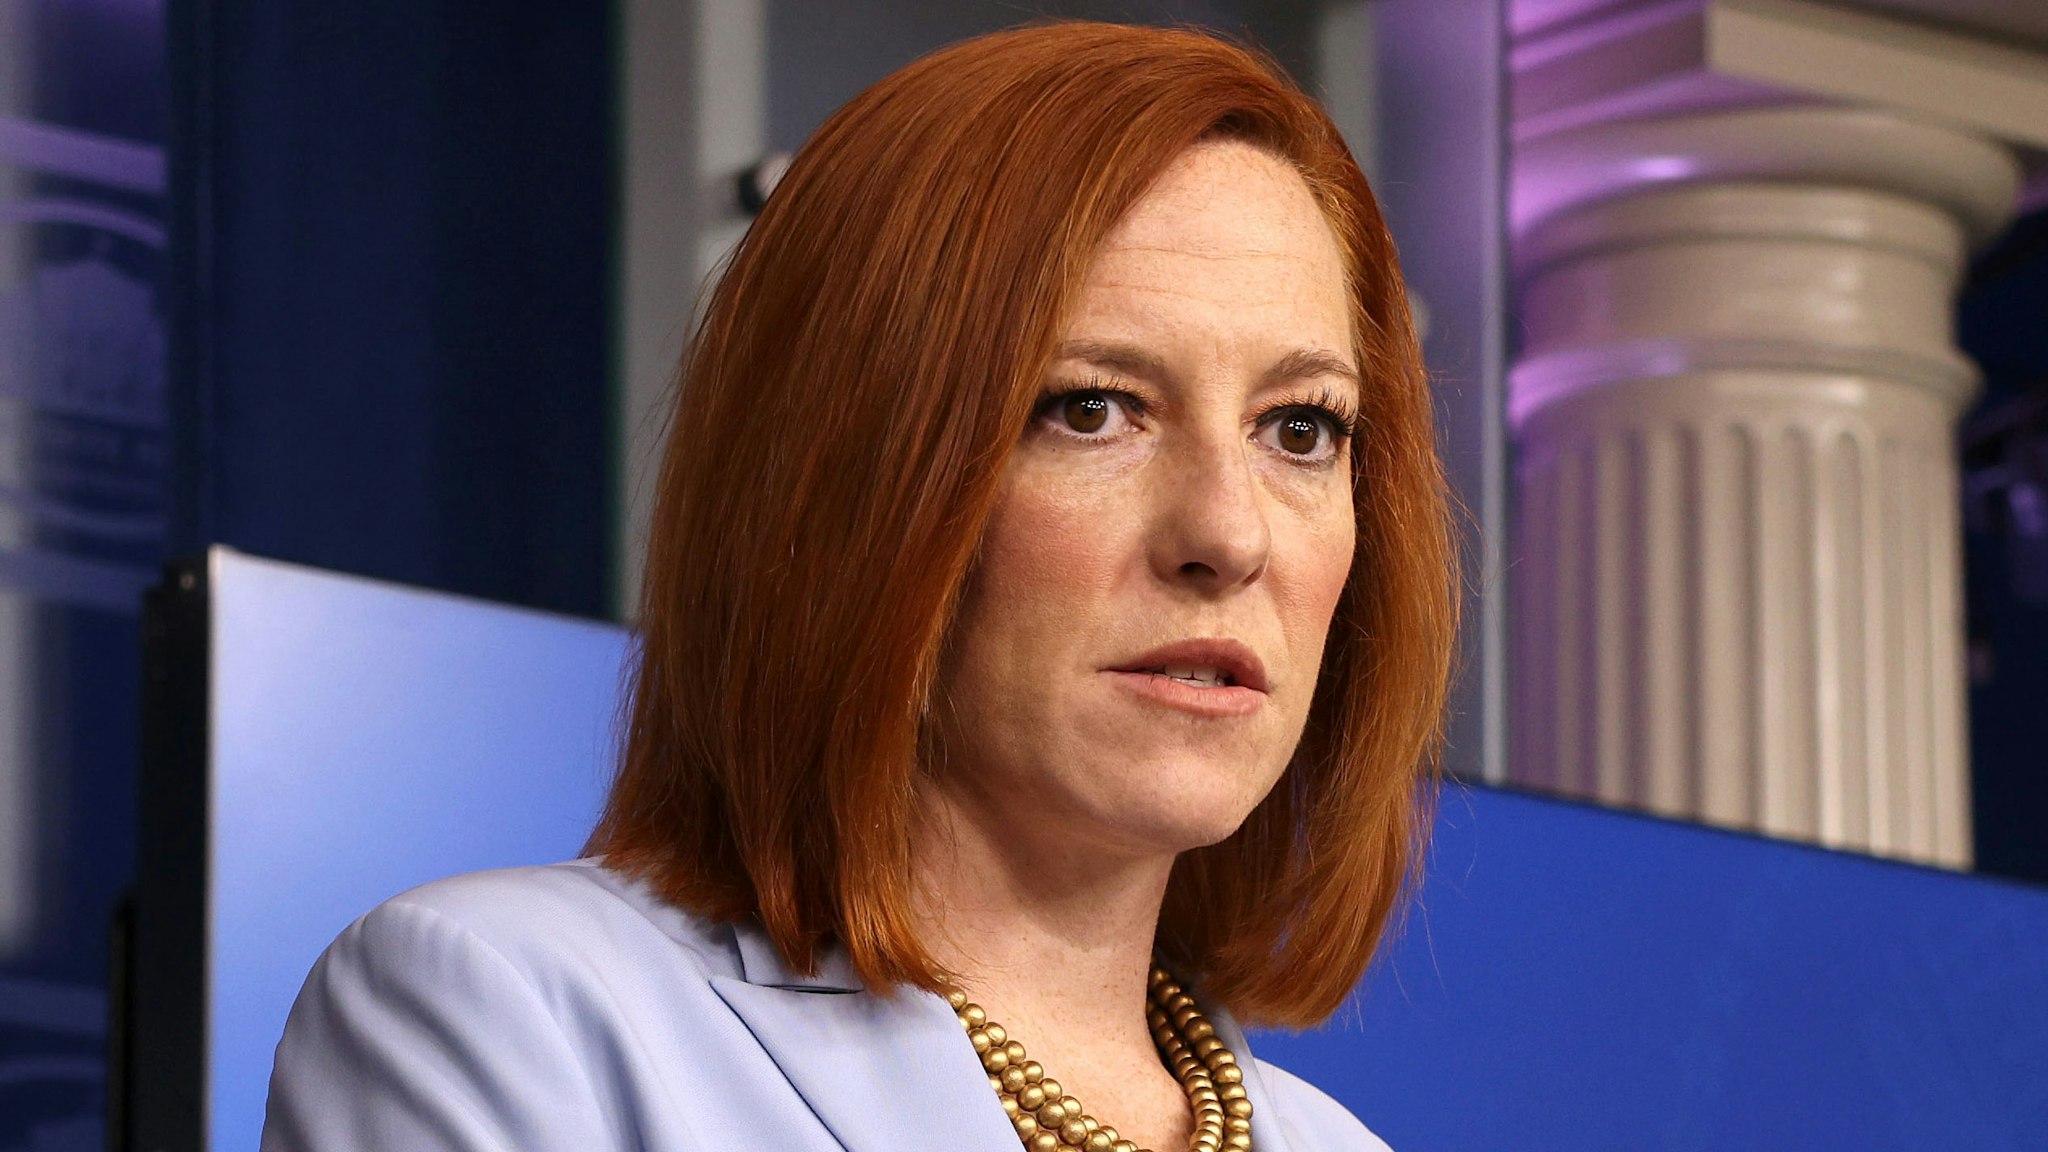 WASHINGTON, DC - MAY 21: White House Press Secretary Jen Psaki speaks during a daily press briefing at the James Brady Press Briefing Room of the White House on May 21, 2021 in Washington, DC. Psaki spoke on the recent ceasefire between Hamas and Israel as well as the White House reopening further to more people.